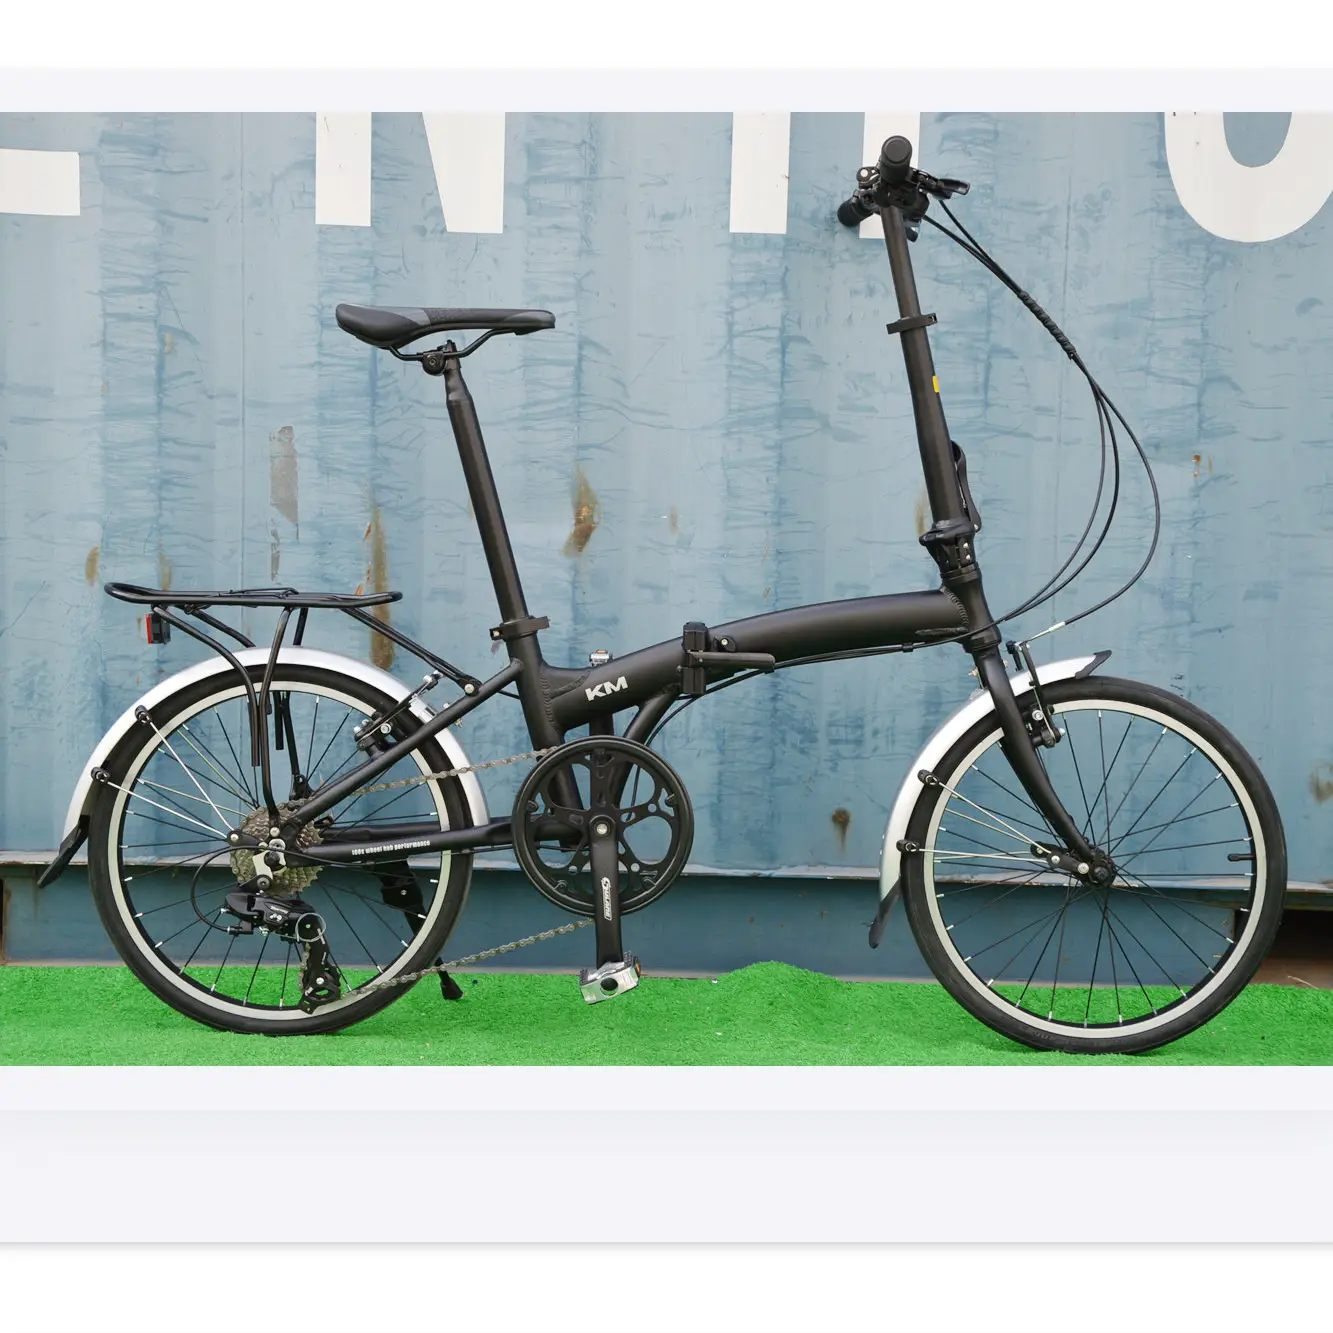 Mini bicycles steel black color folding bikes with alloy rims and folding handle bar for hot sale